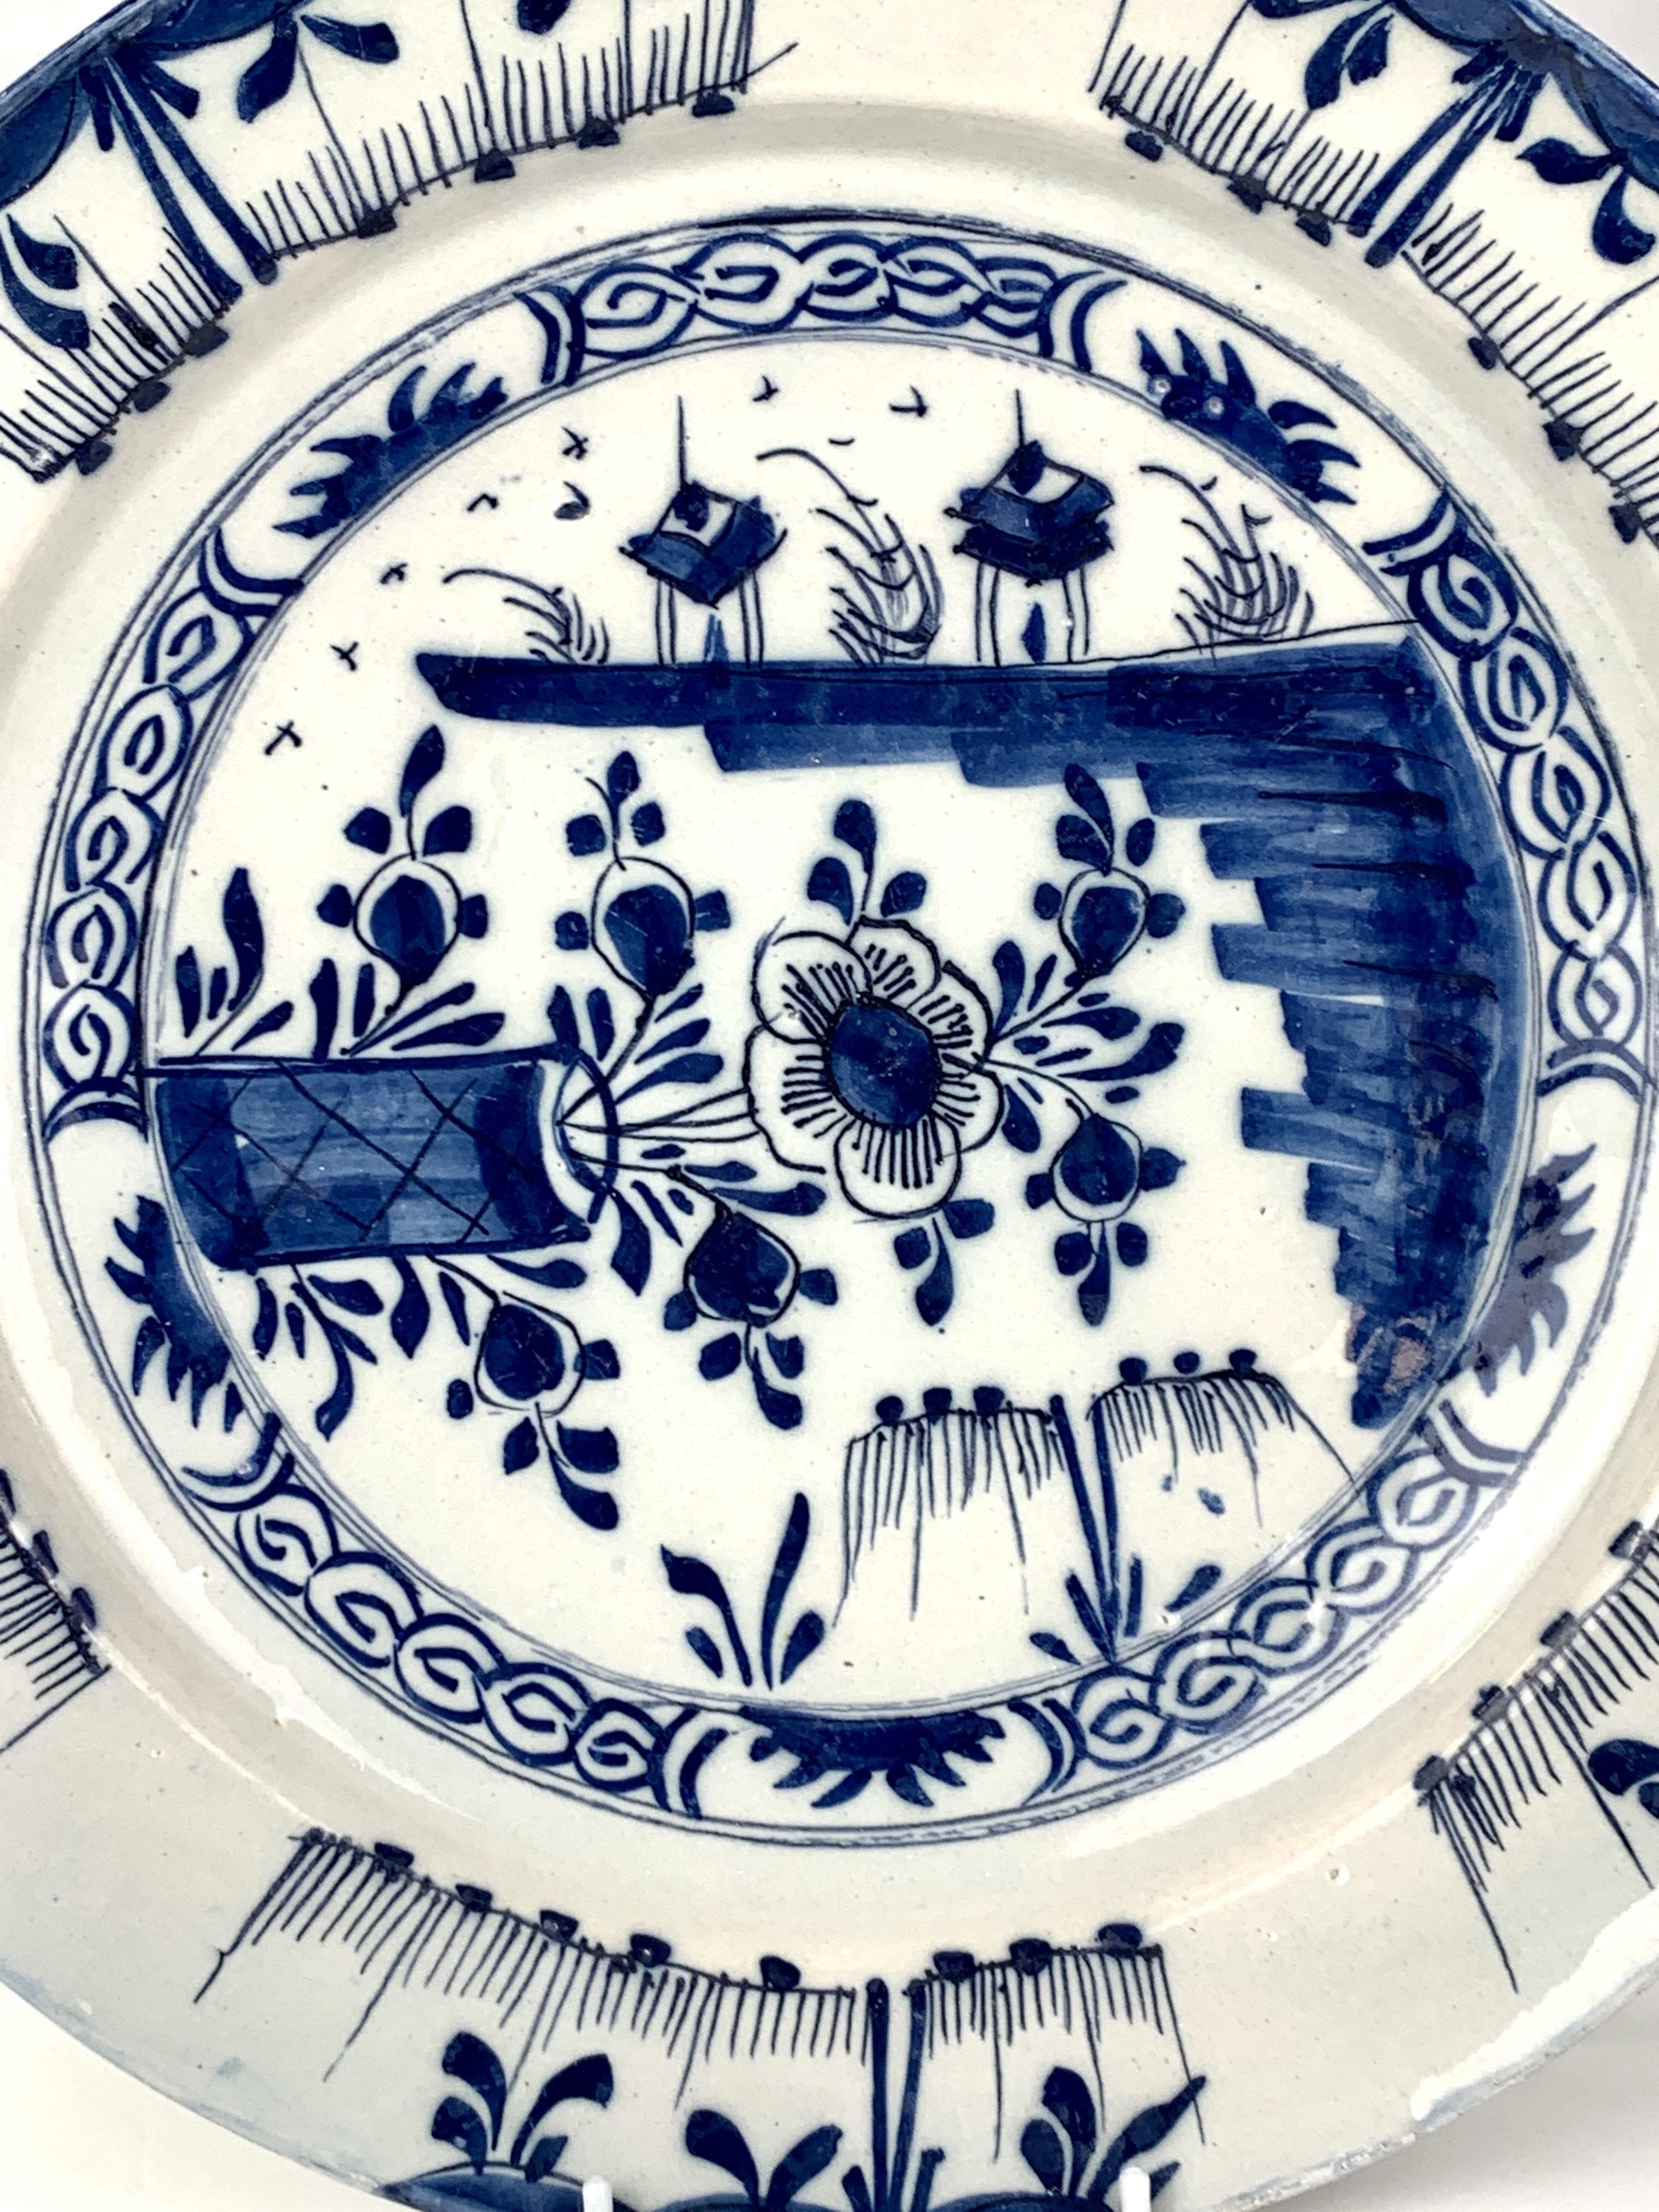 This blue and white Dutch Delft charger shows a chinoiserie scene in a lovely naive style.
The chinoiserie scene in the center of the charger includes three unique viewpoints.
On one side, we see a flower and buds in a vase.
On the other side, we